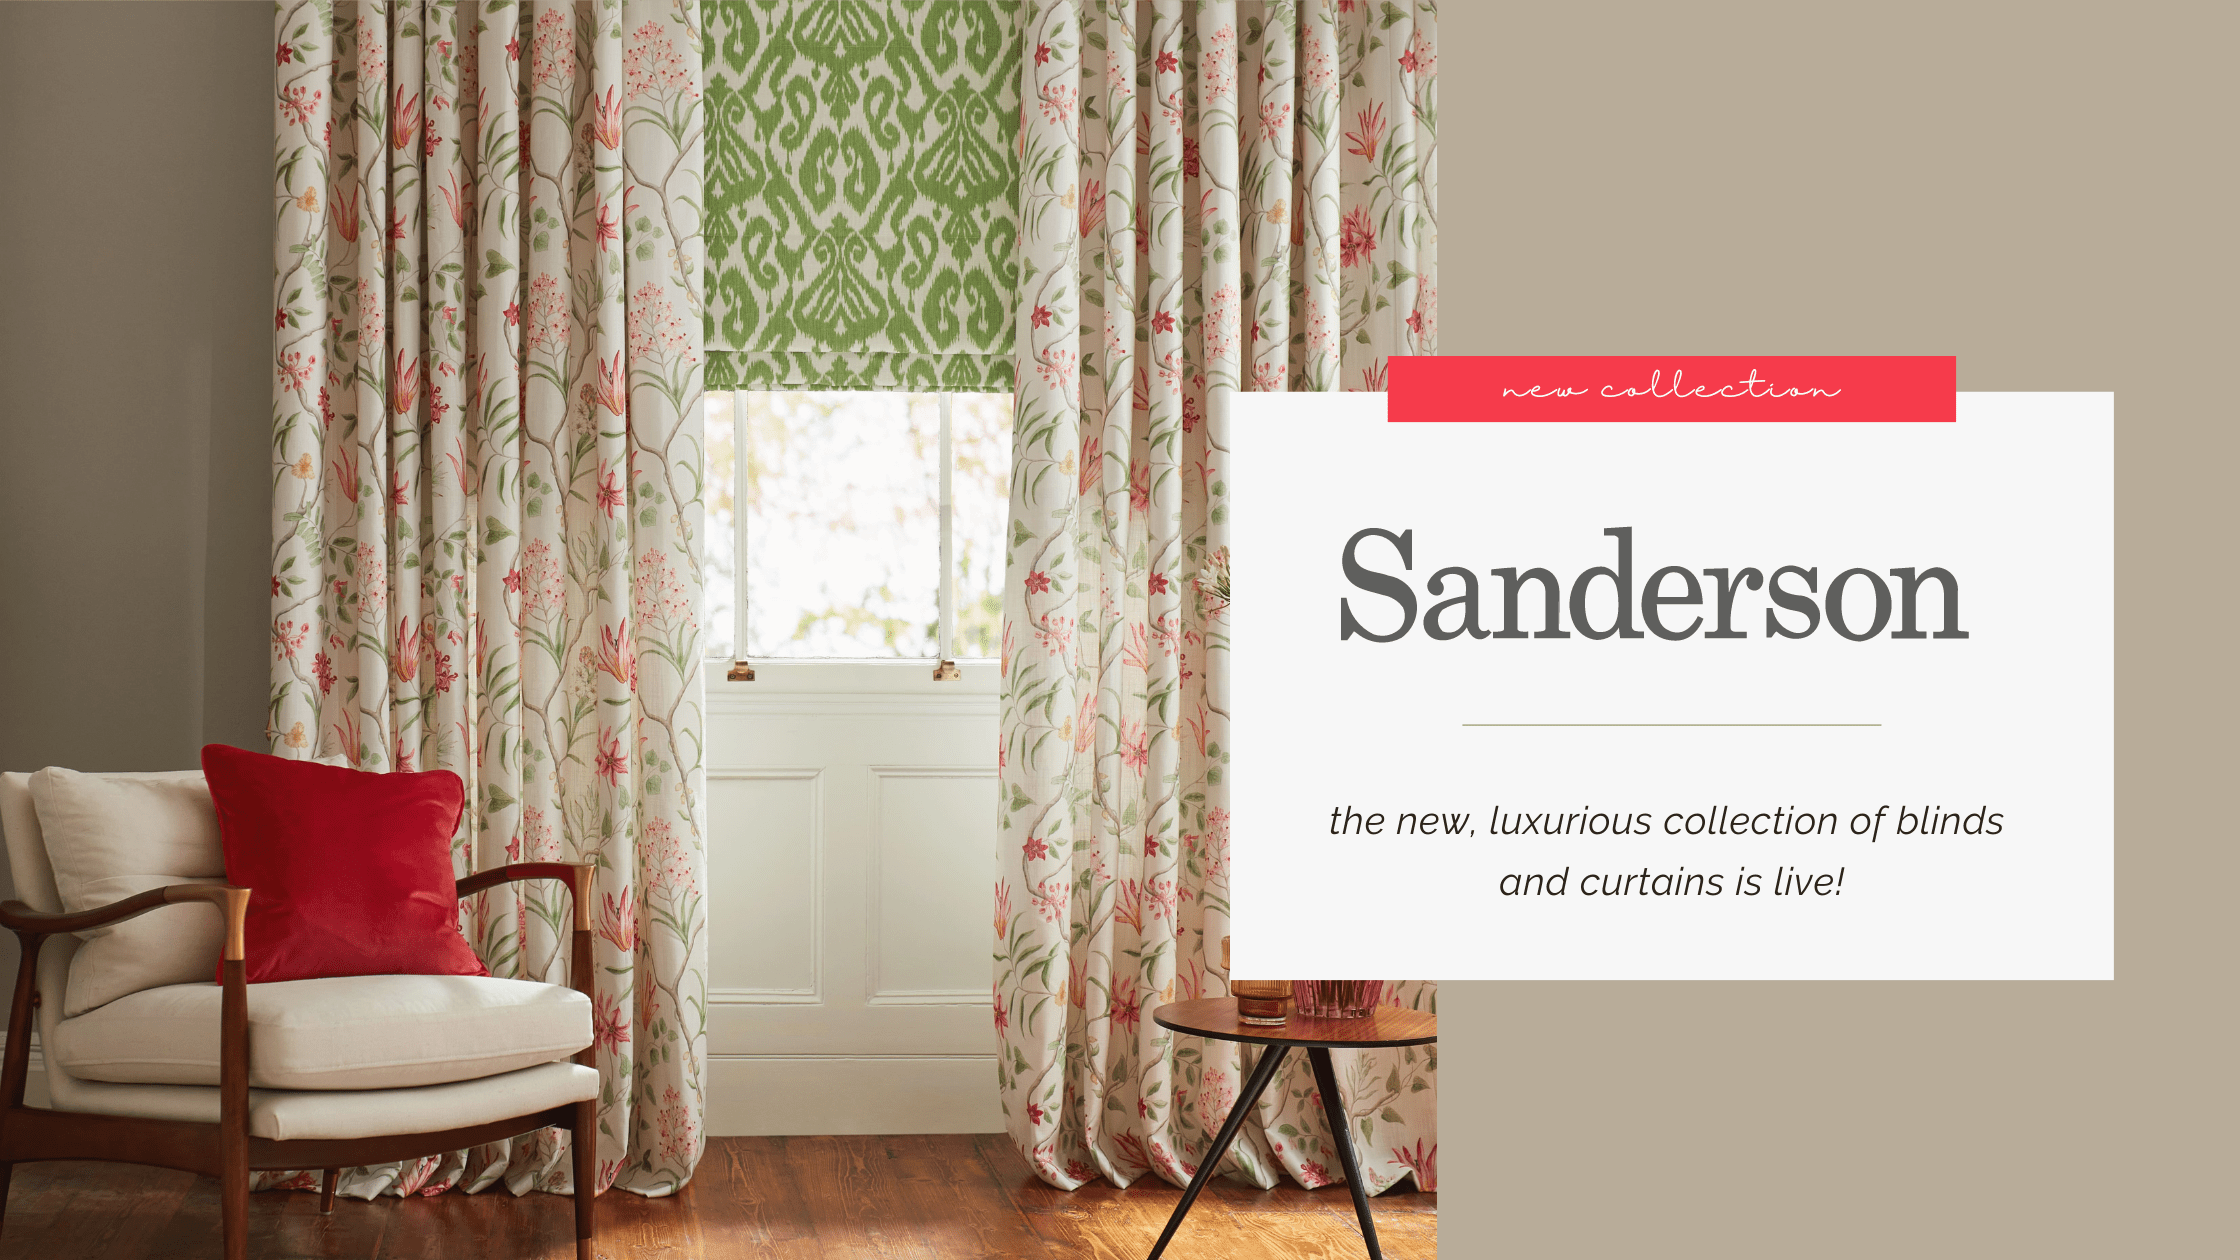 New Sanderson blinds and curtains